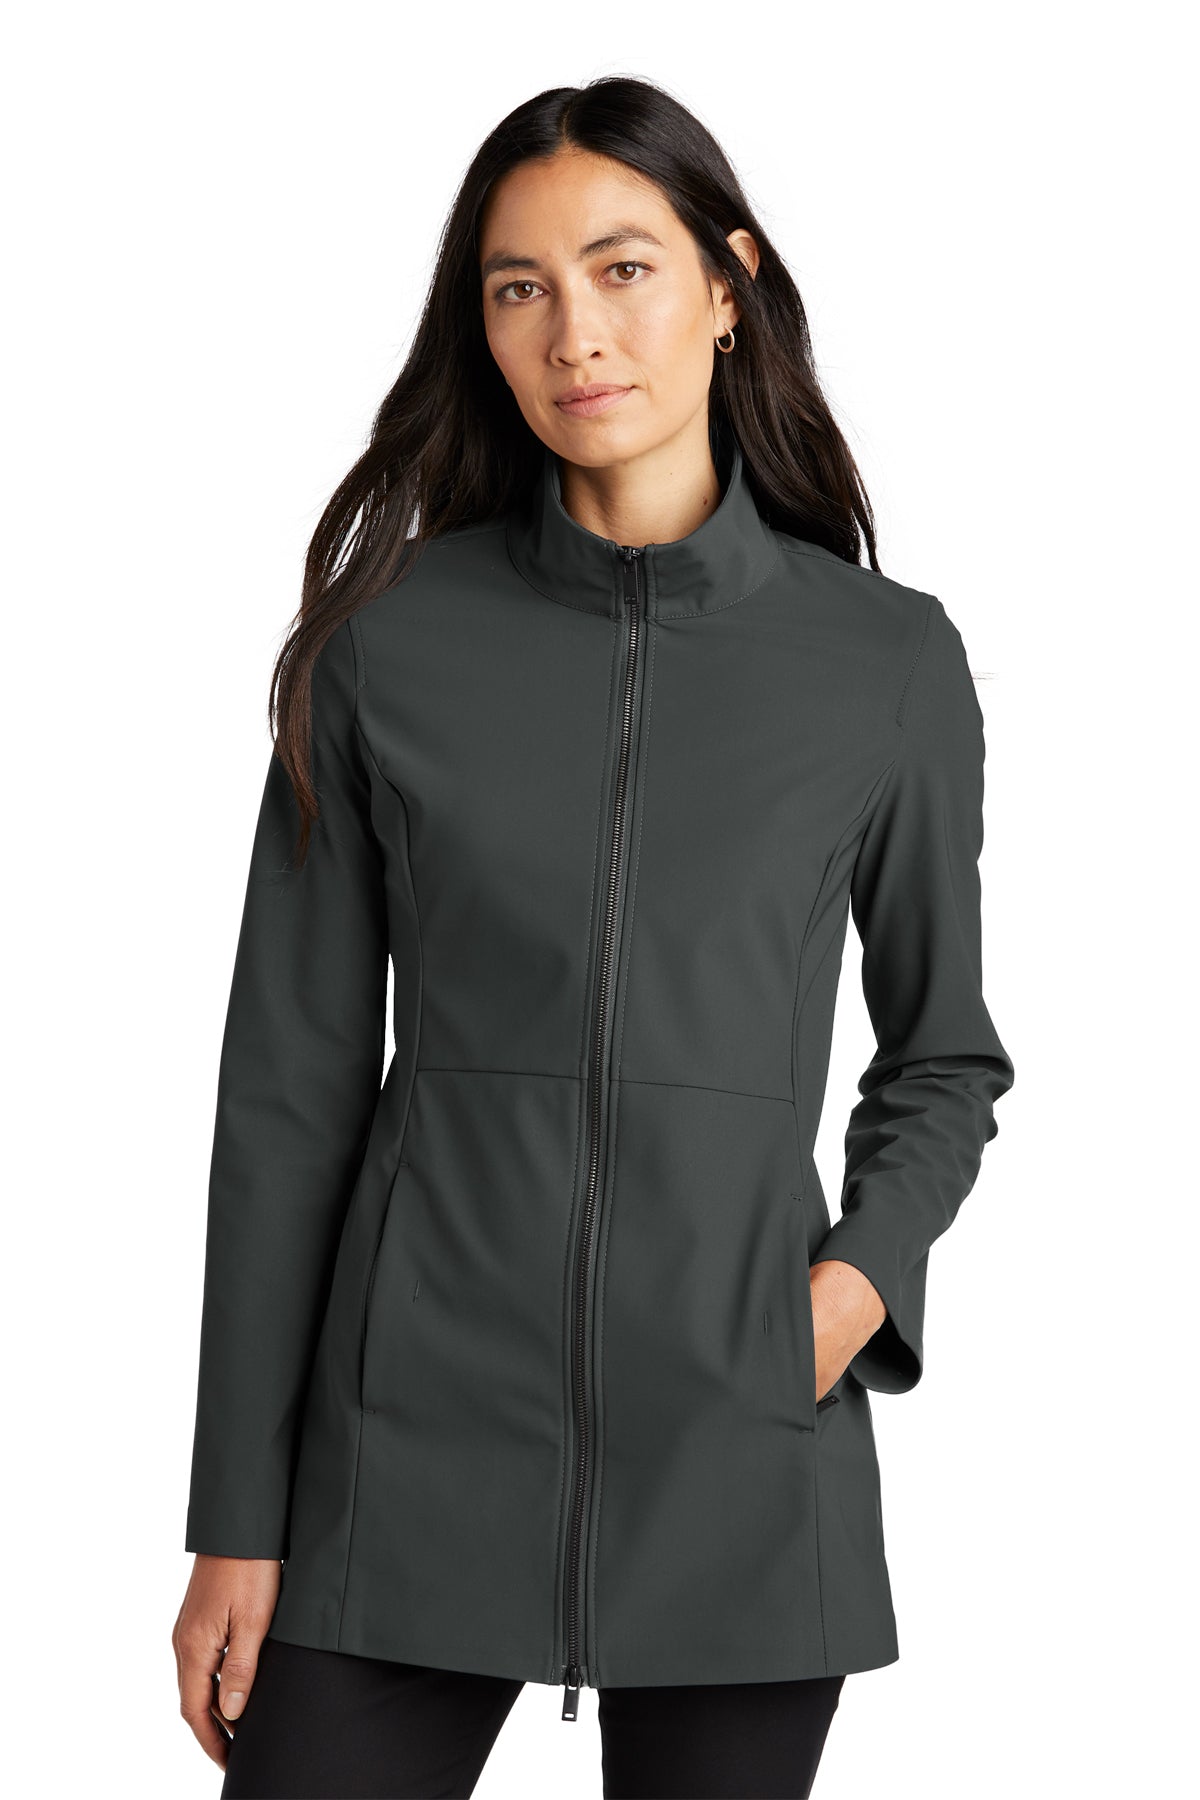 Faille Soft Shell Zip Up Coat - Anchor Grey (Ships in 1-2 Weeks)